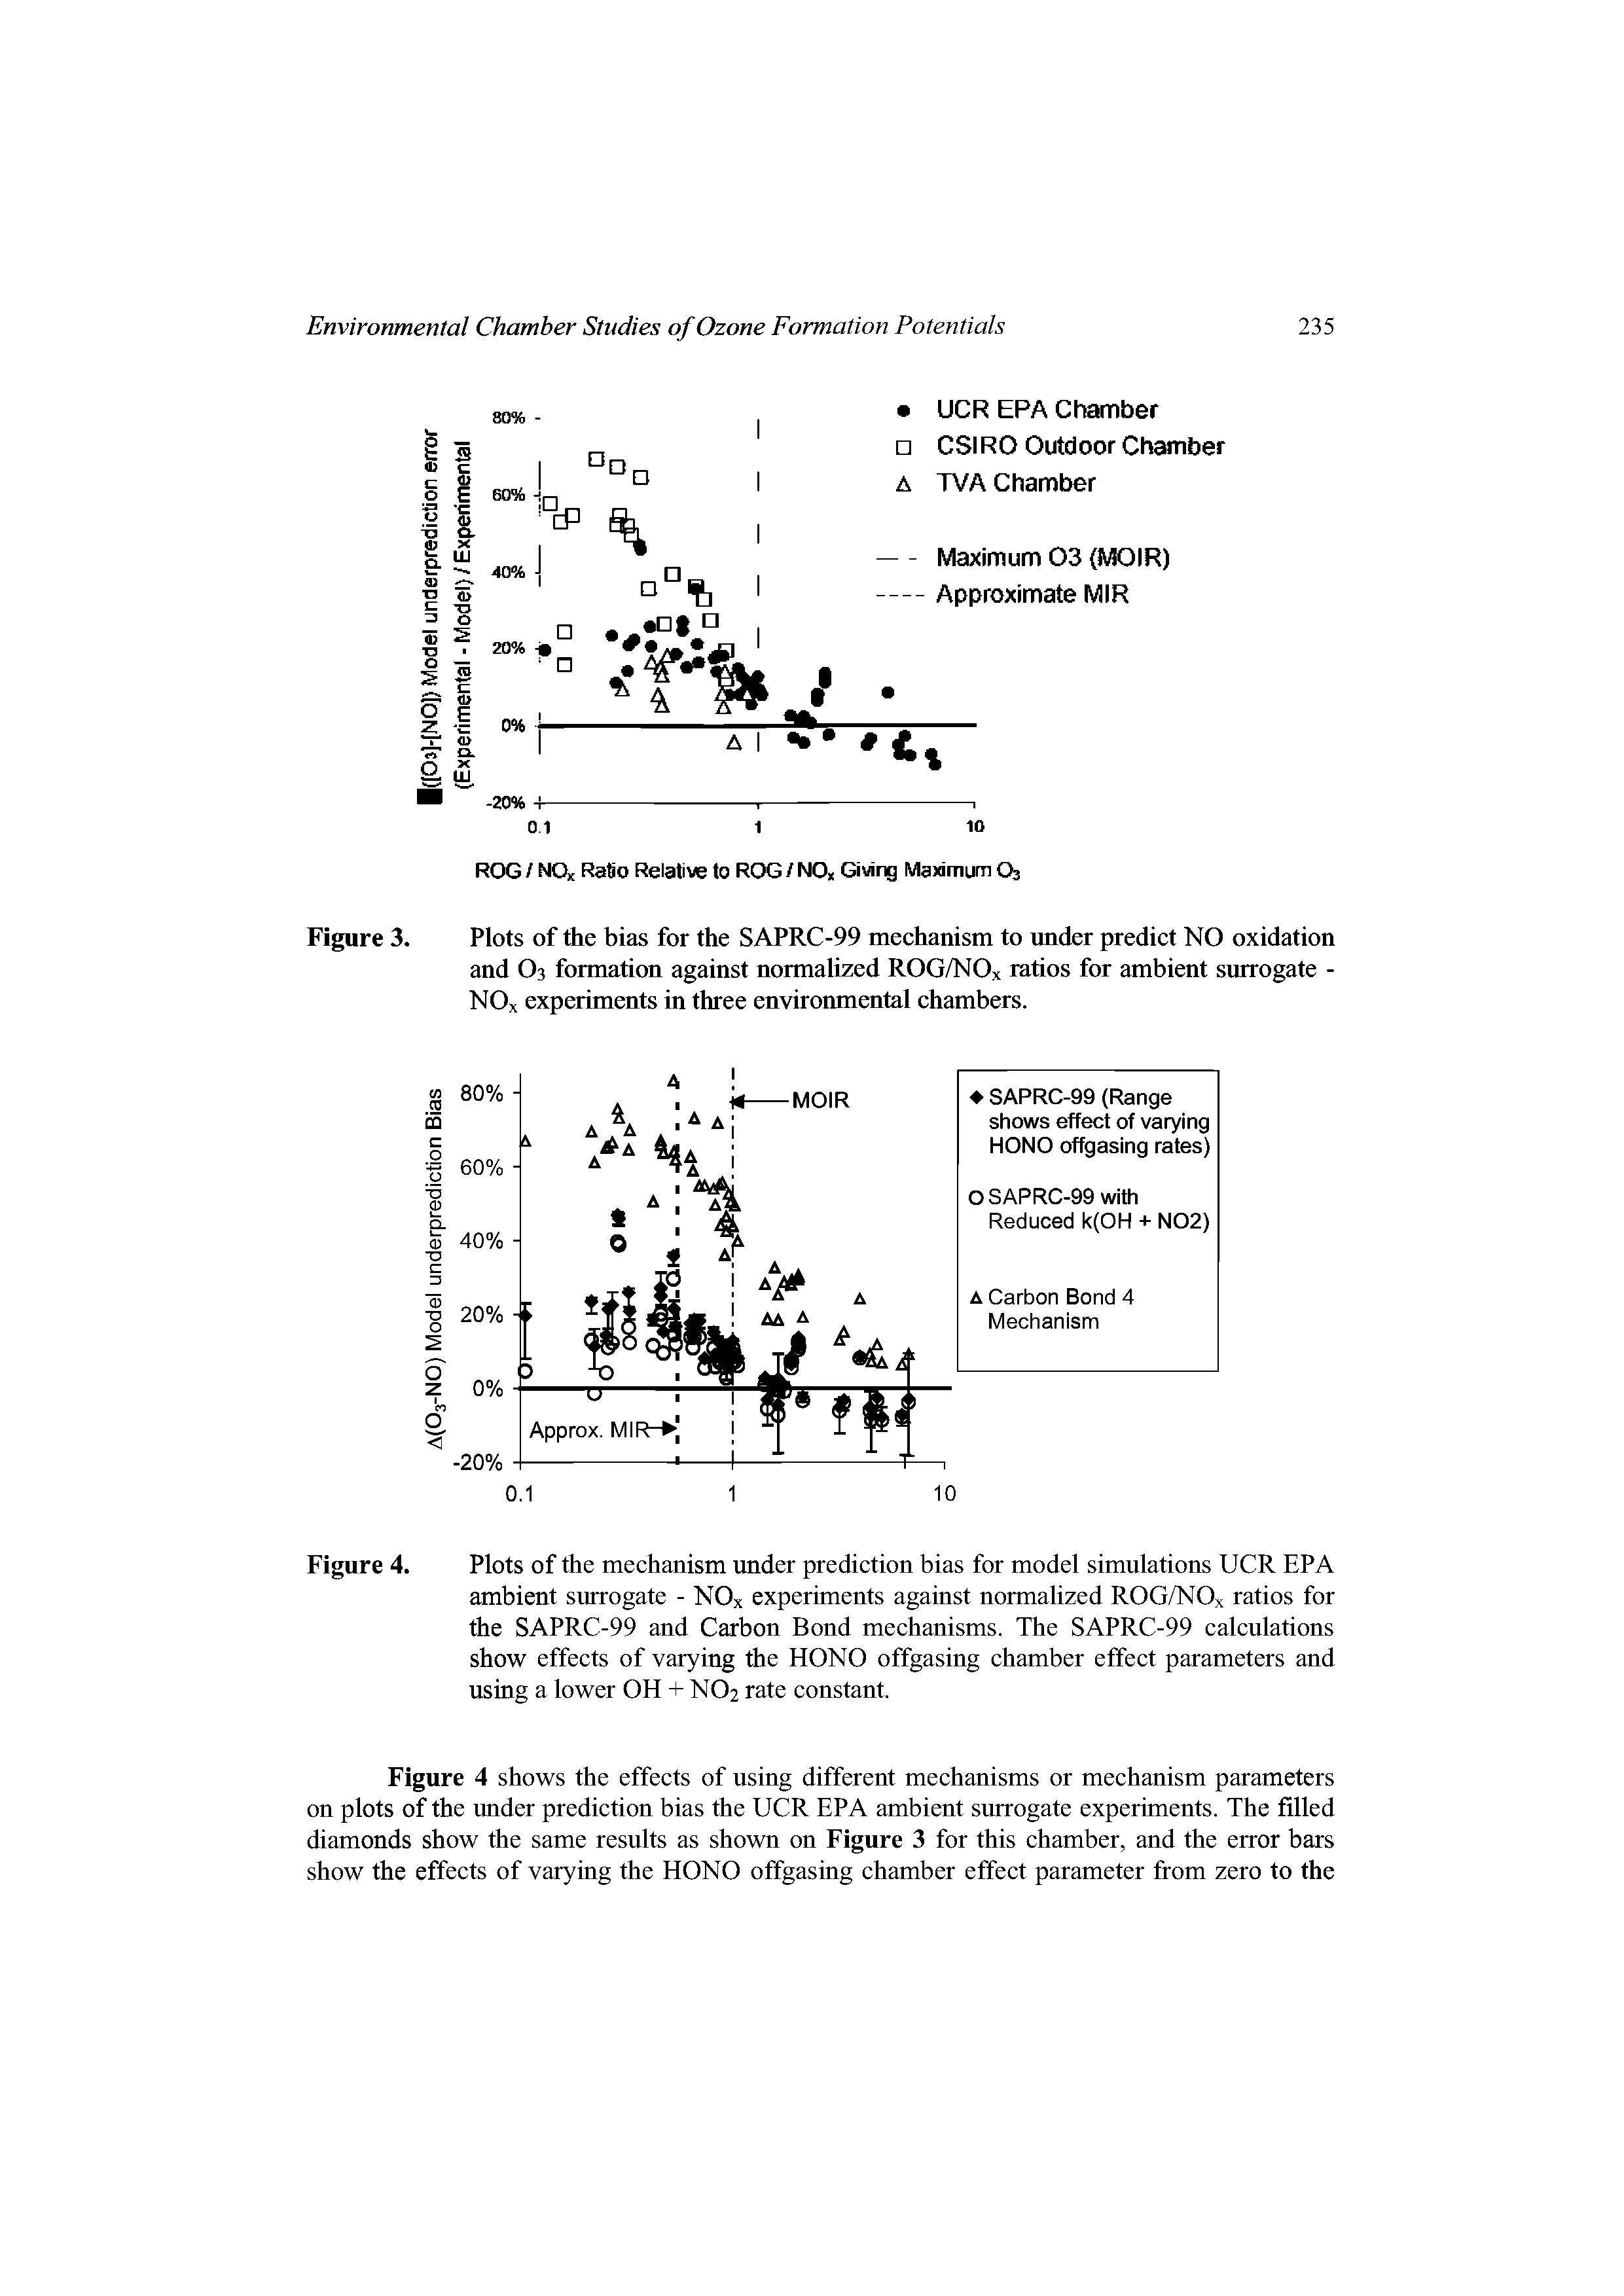 Figure 4. Plots of the mechanism under prediction bias for model simulations UCR EPA ambient surrogate - NOx experiments against normalized ROG/NOx ratios for the SAPRC-99 and Carbon Bond mechanisms. The SAPRC-99 calculations show effects of varying the MONO offgasing chamber effect parameters and using a lower OH + NO2 rate constant.